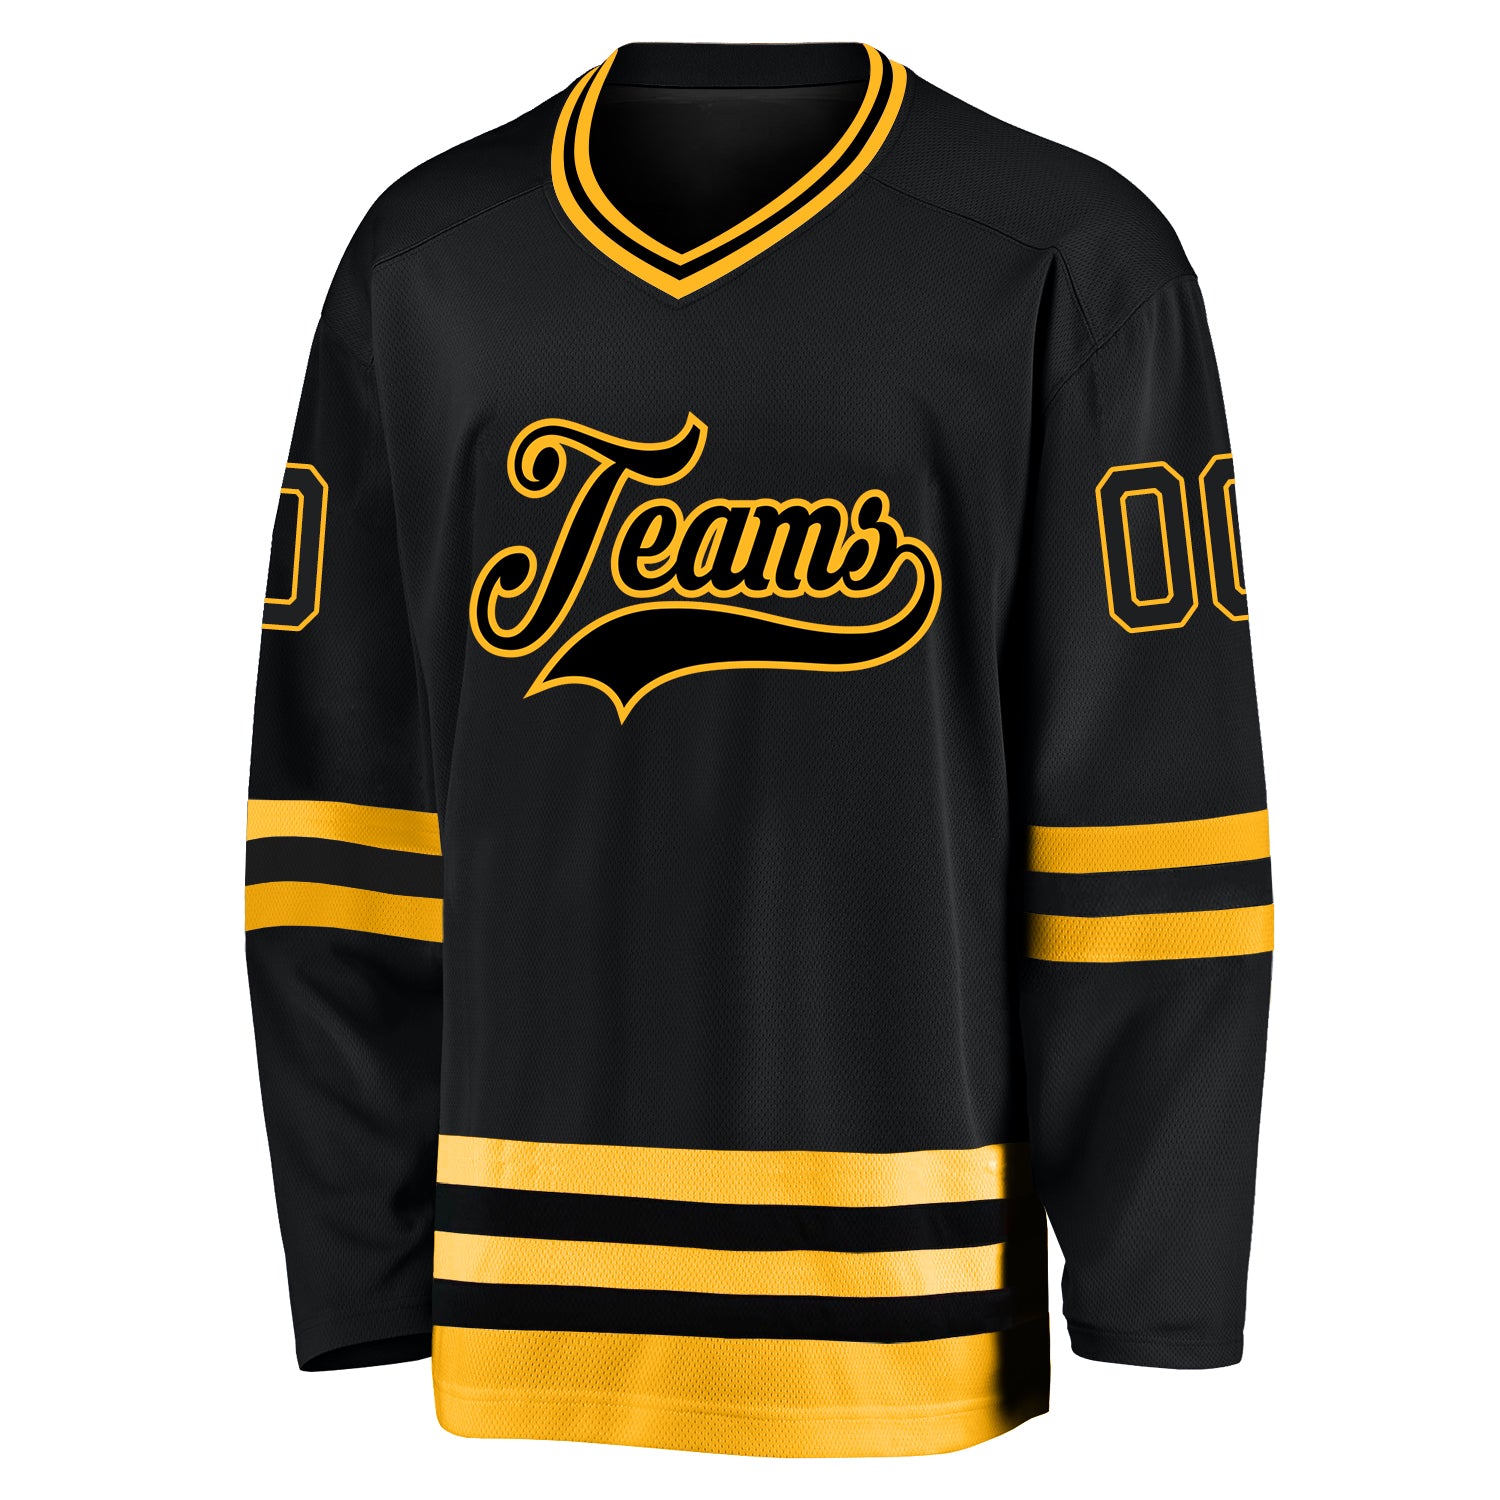 Custom Teal Black-Old Gold Hockey Jersey Discount